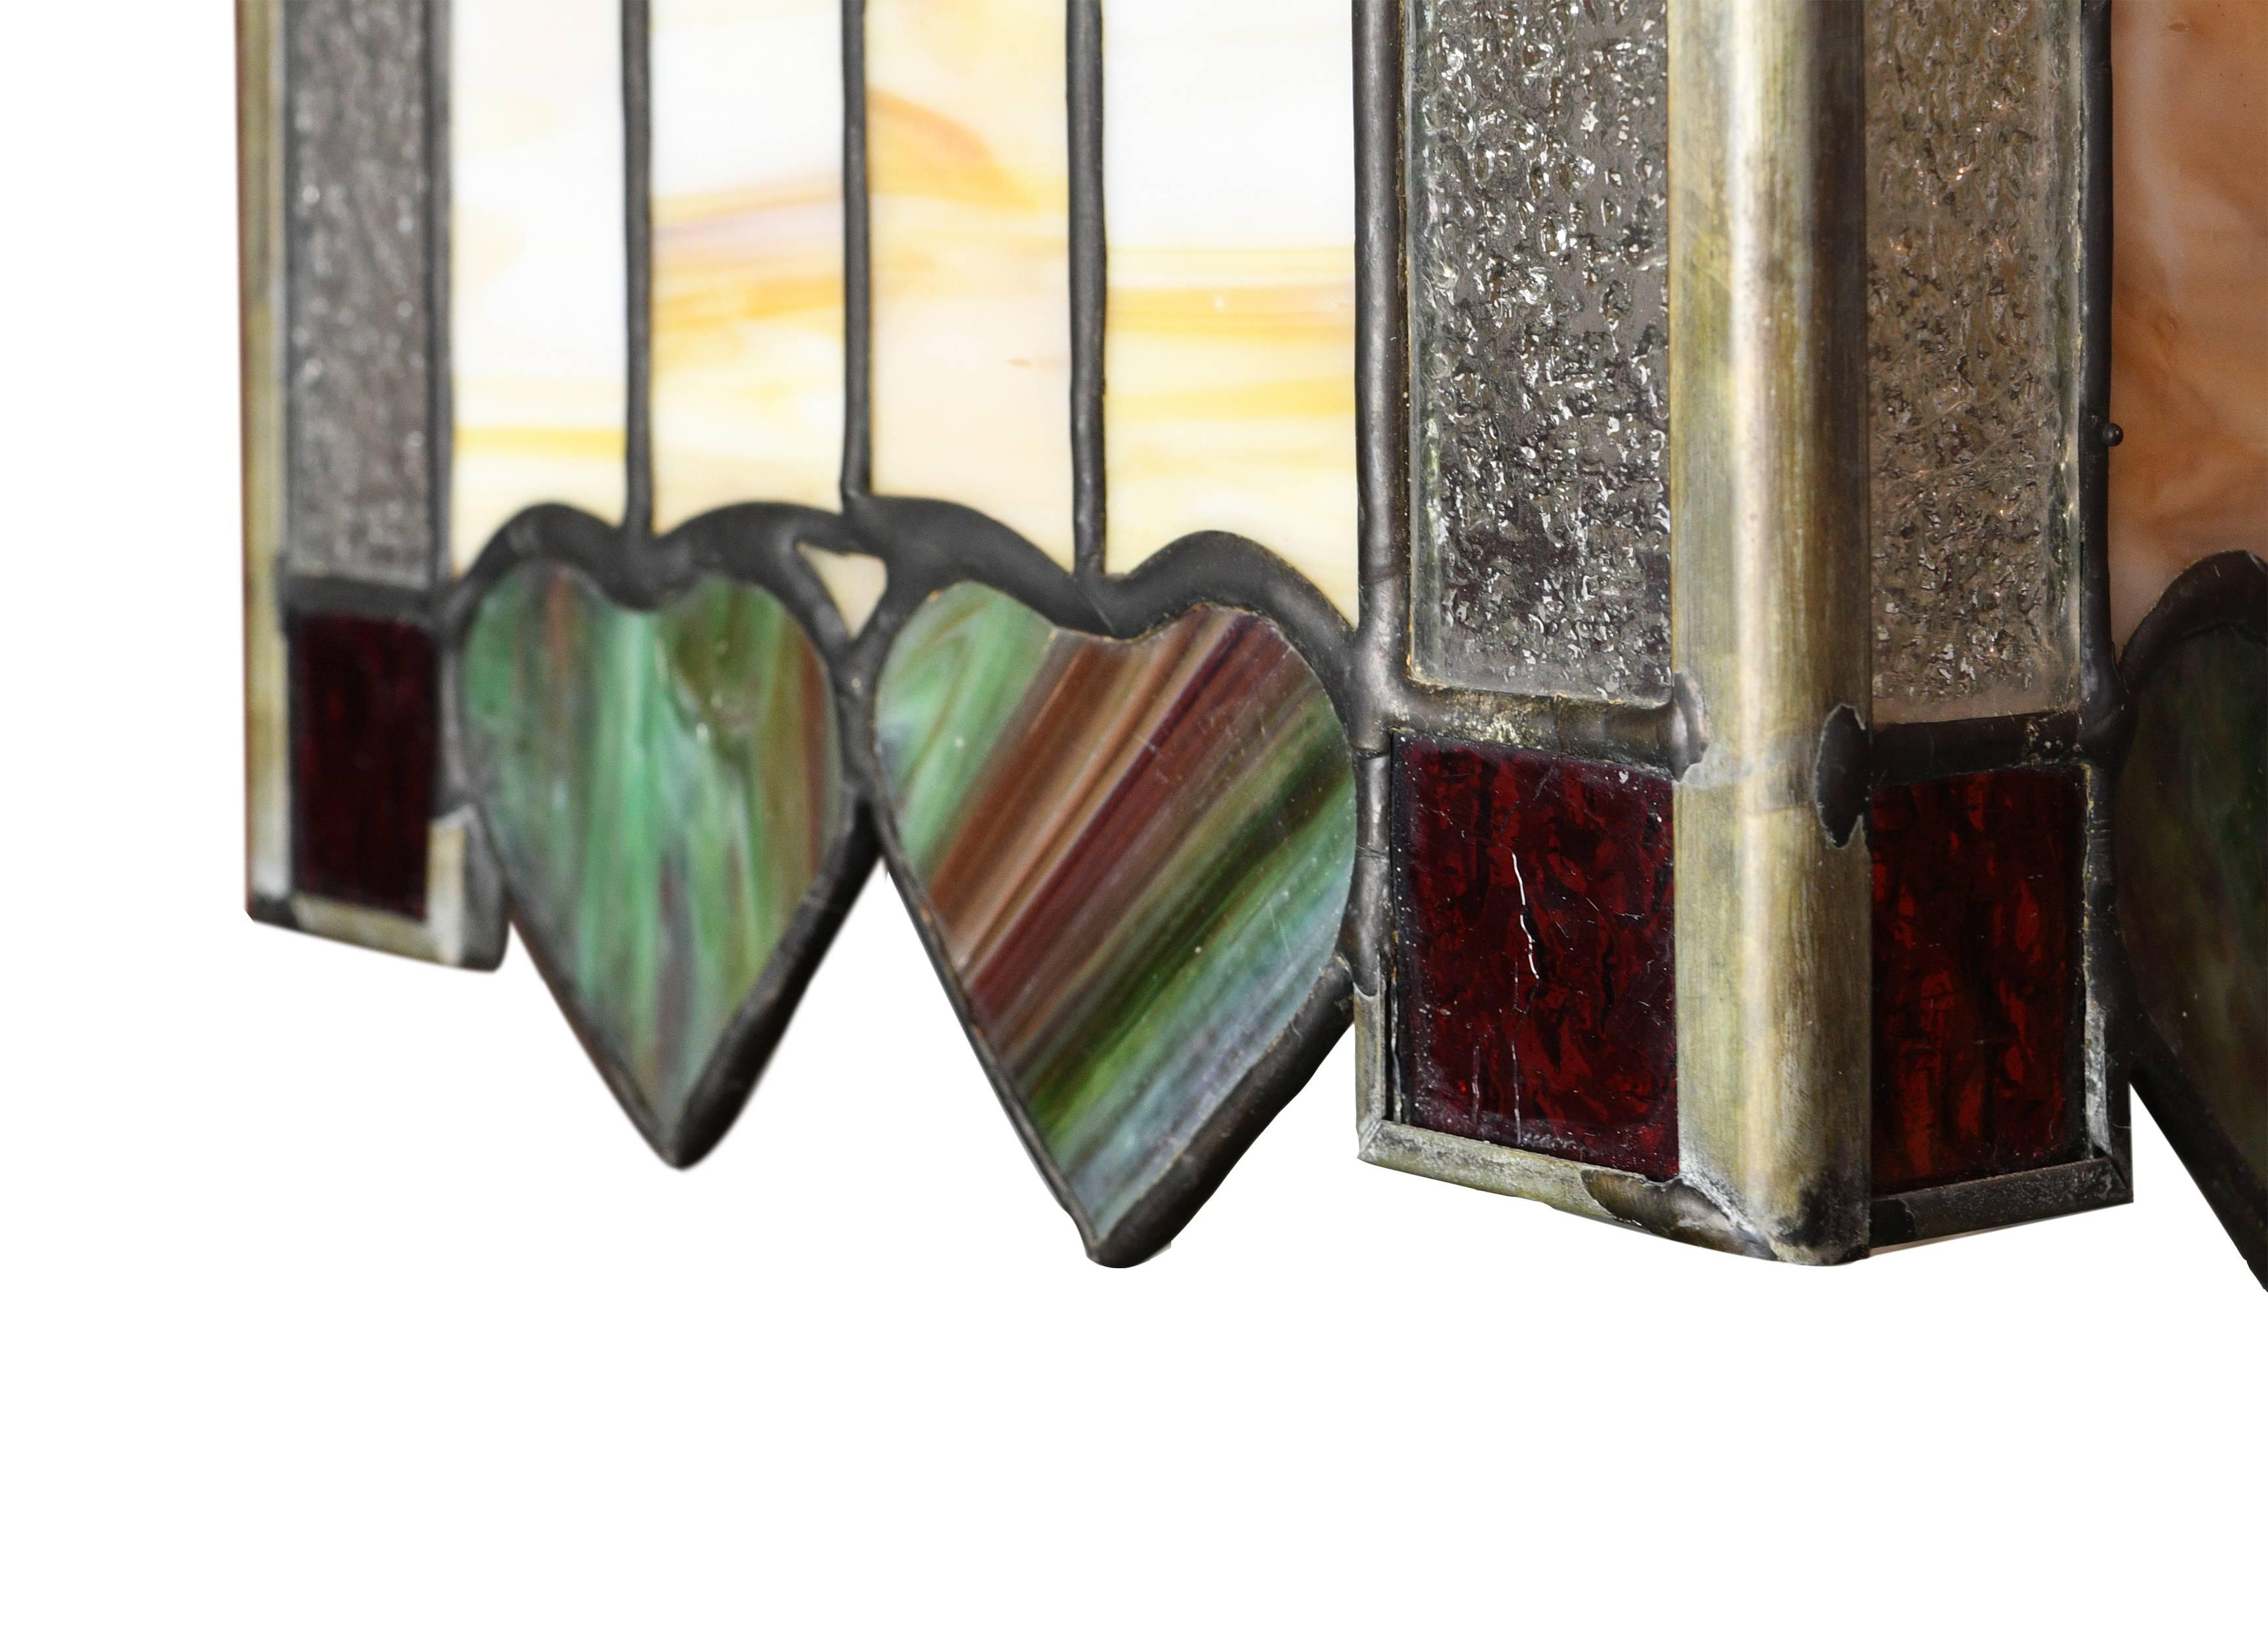 This pendant has heart-shaped patterns, which are unique and not often seen in lighting. The shade is made of small pieces of leaded glass, some in the shape of hearts, chevrons,and other geometric, multi-color designs. The warm tone of the fixture